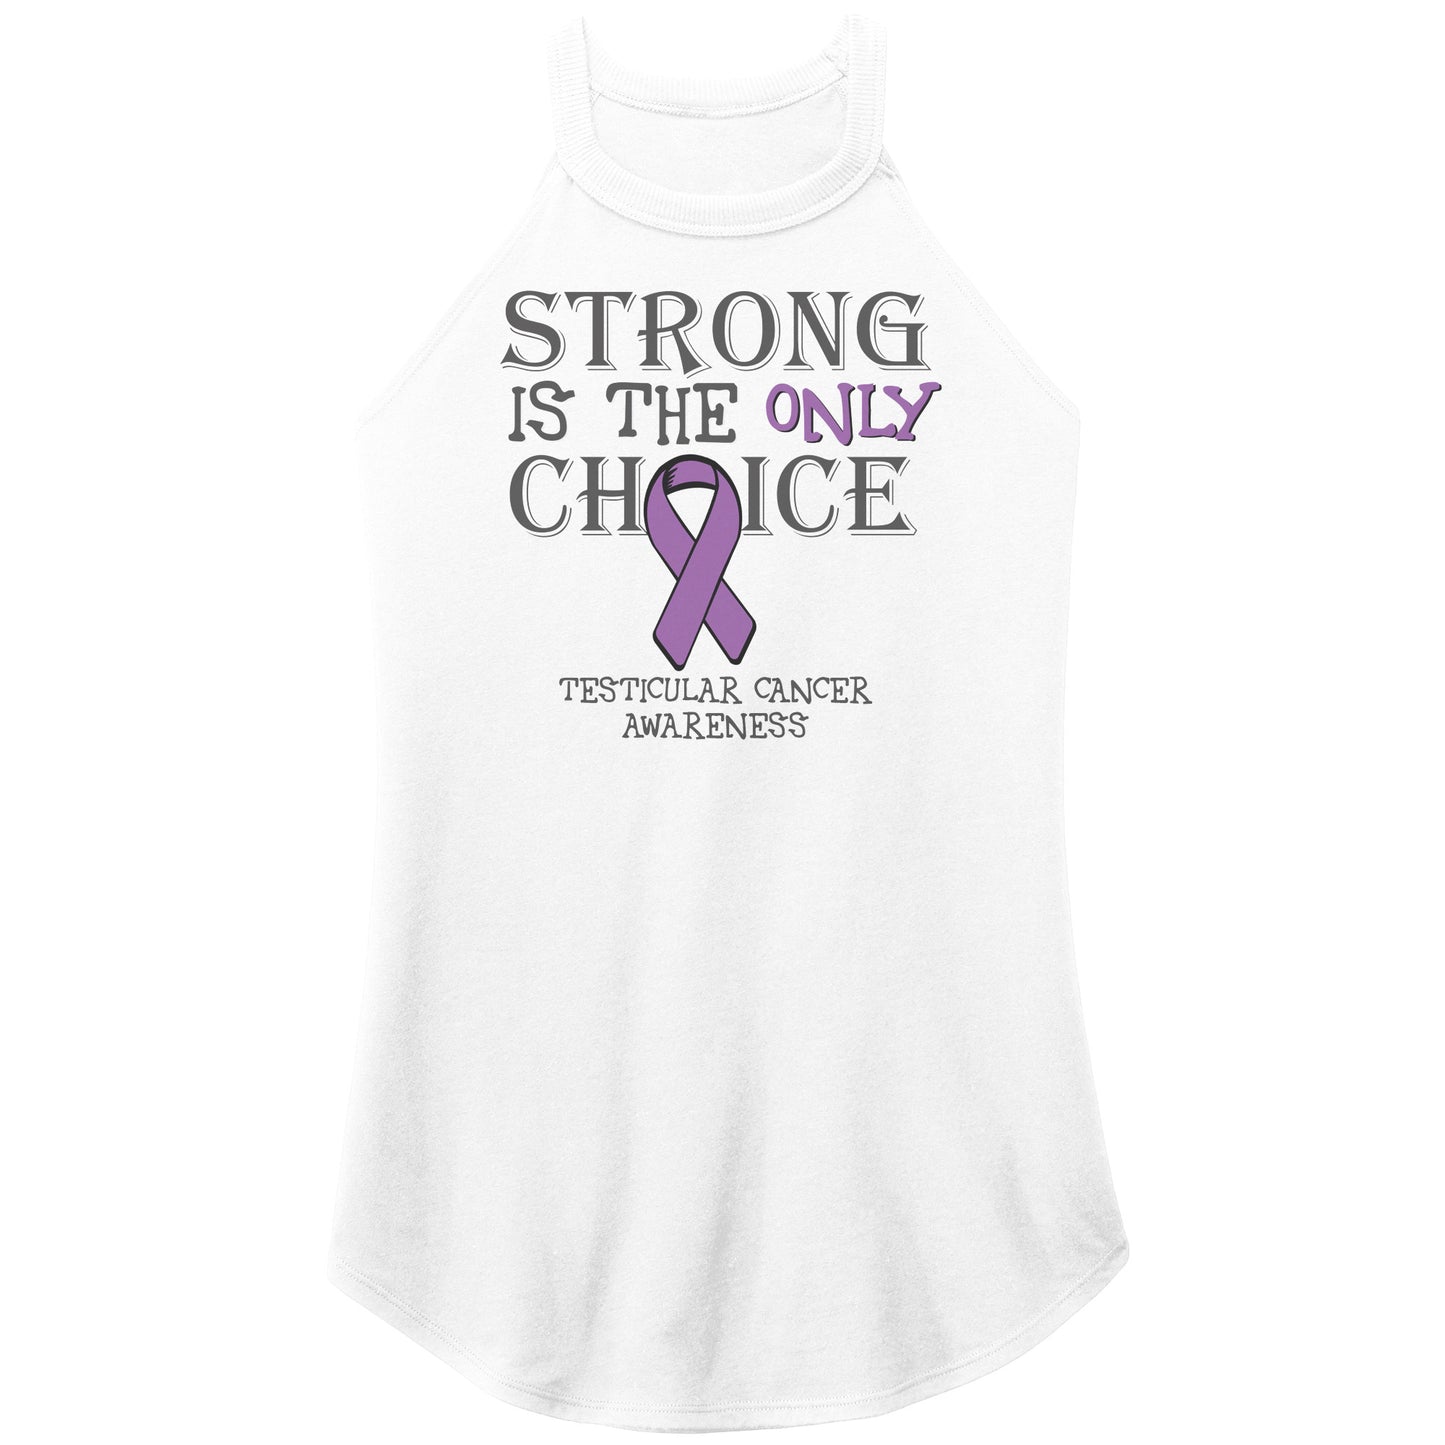 Strong is the Only Choice -Testicular Cancer Awareness T-Shirt, Hoodie, Tank